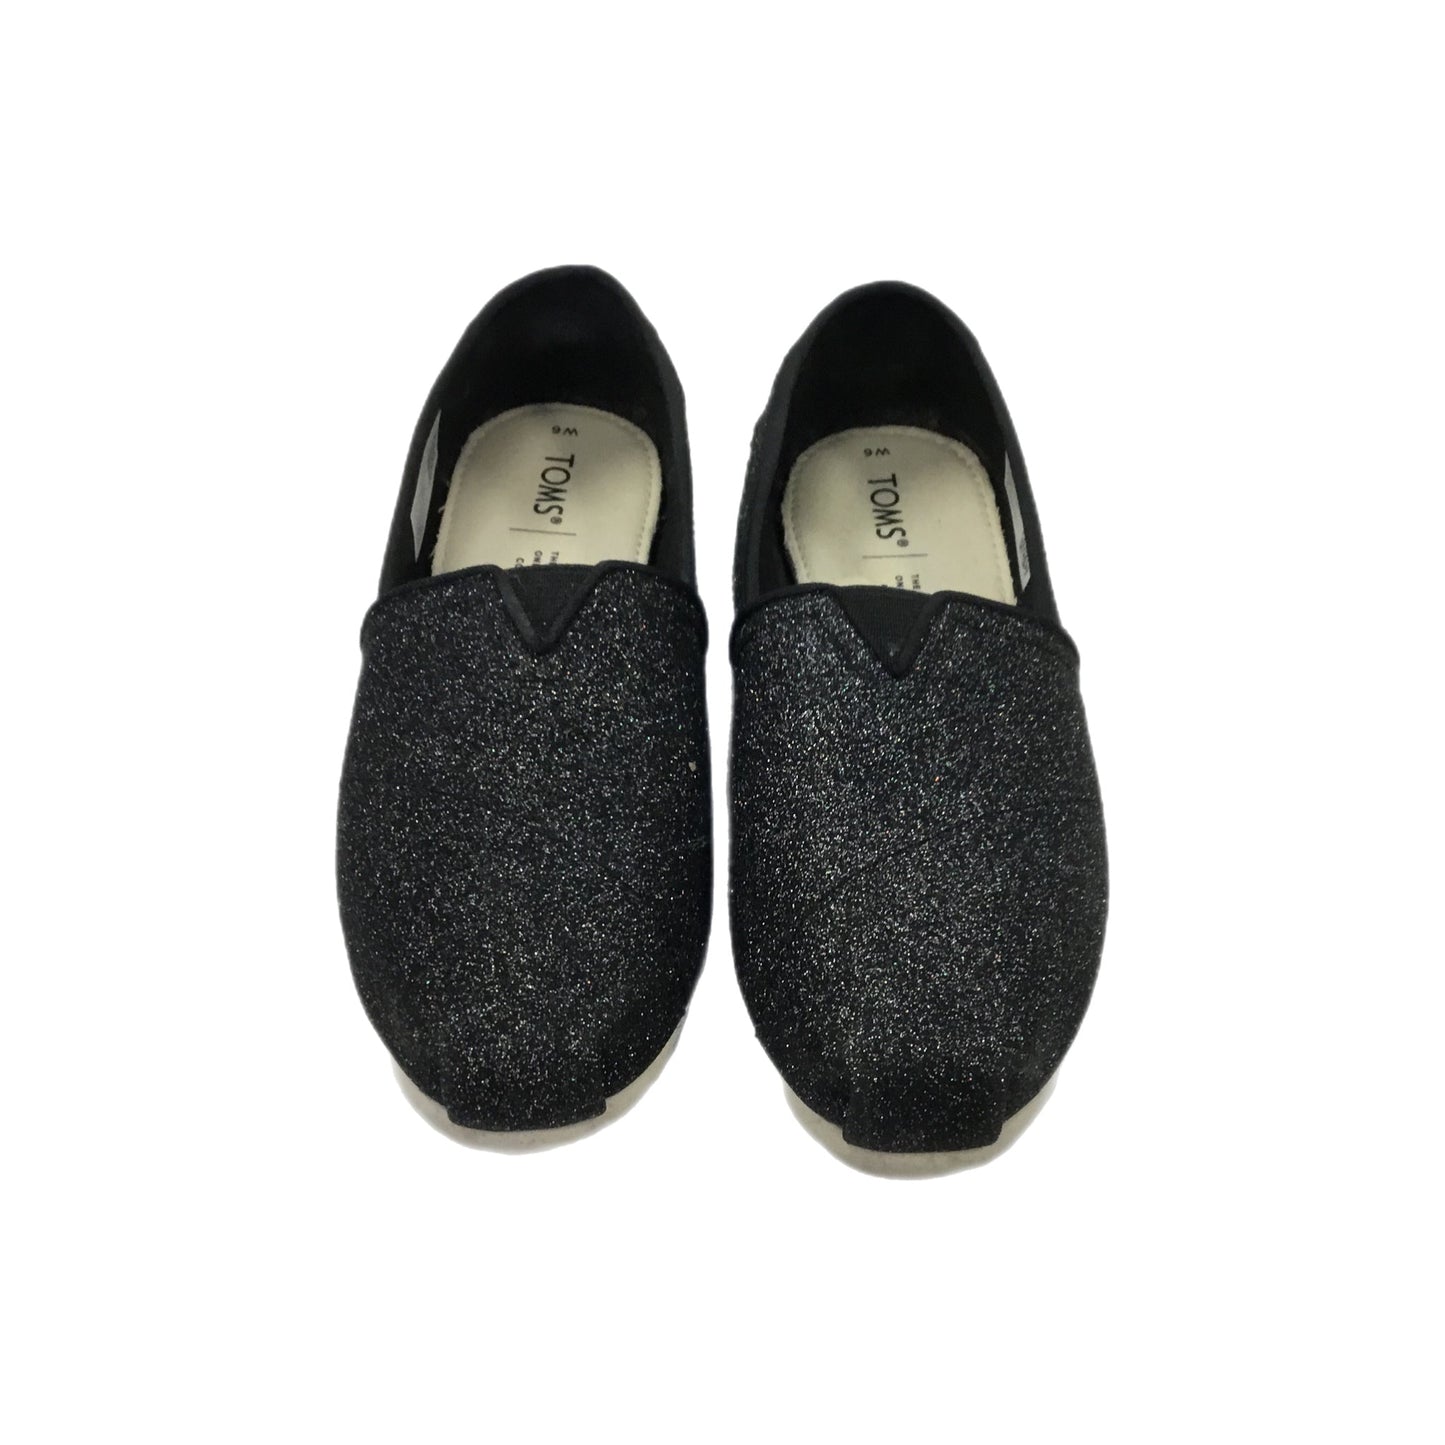 Shoes Flats Loafer Oxford By Toms  Size: 6